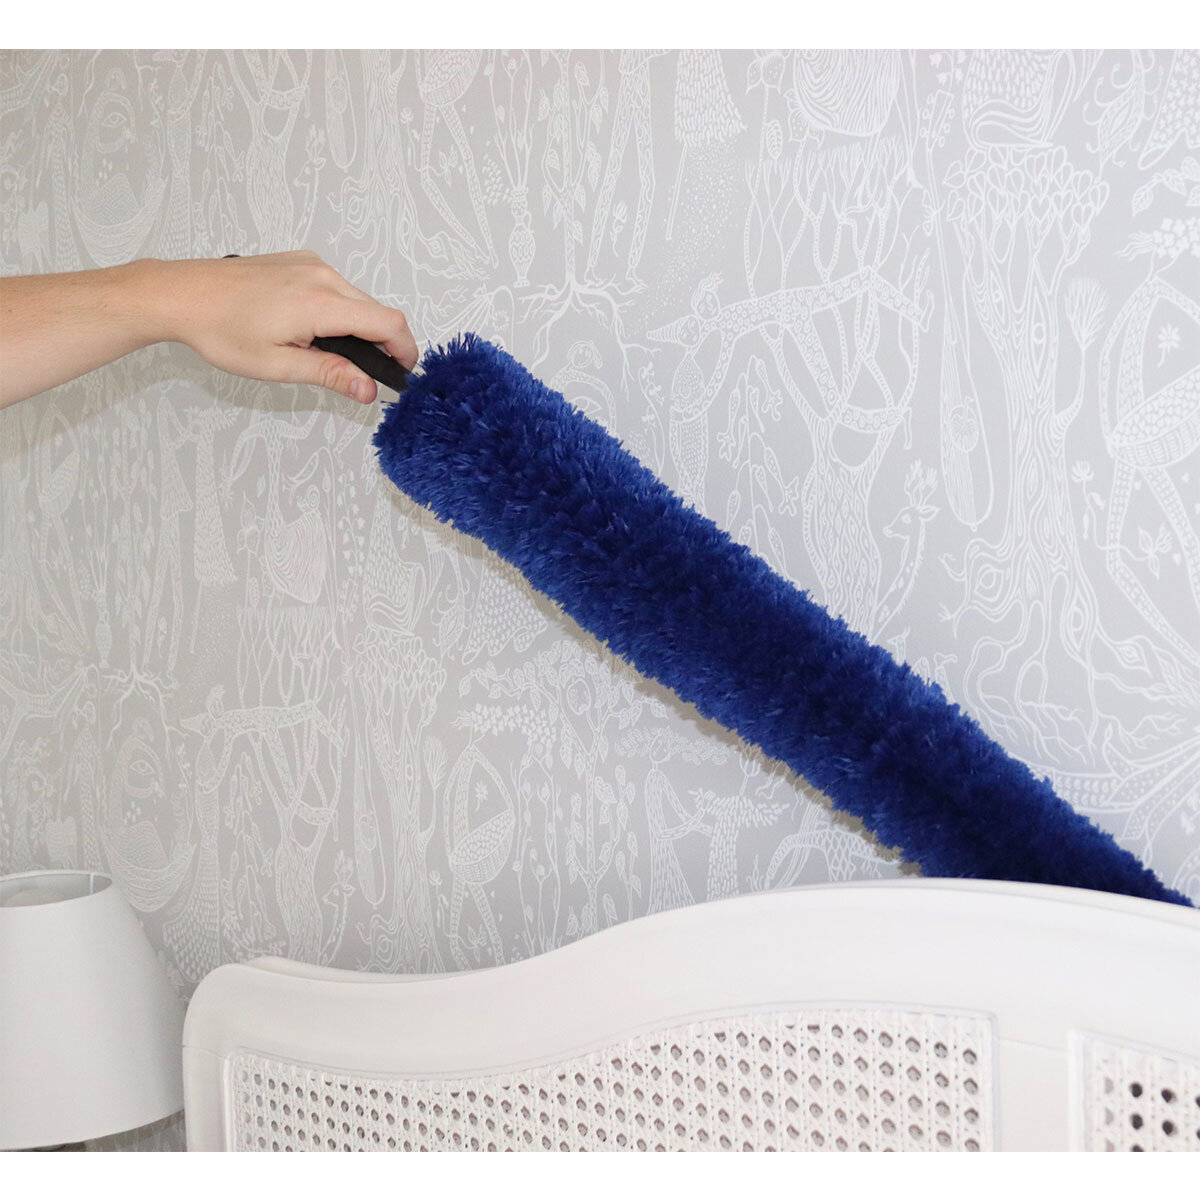 Lifestyle image of duster being used to clean